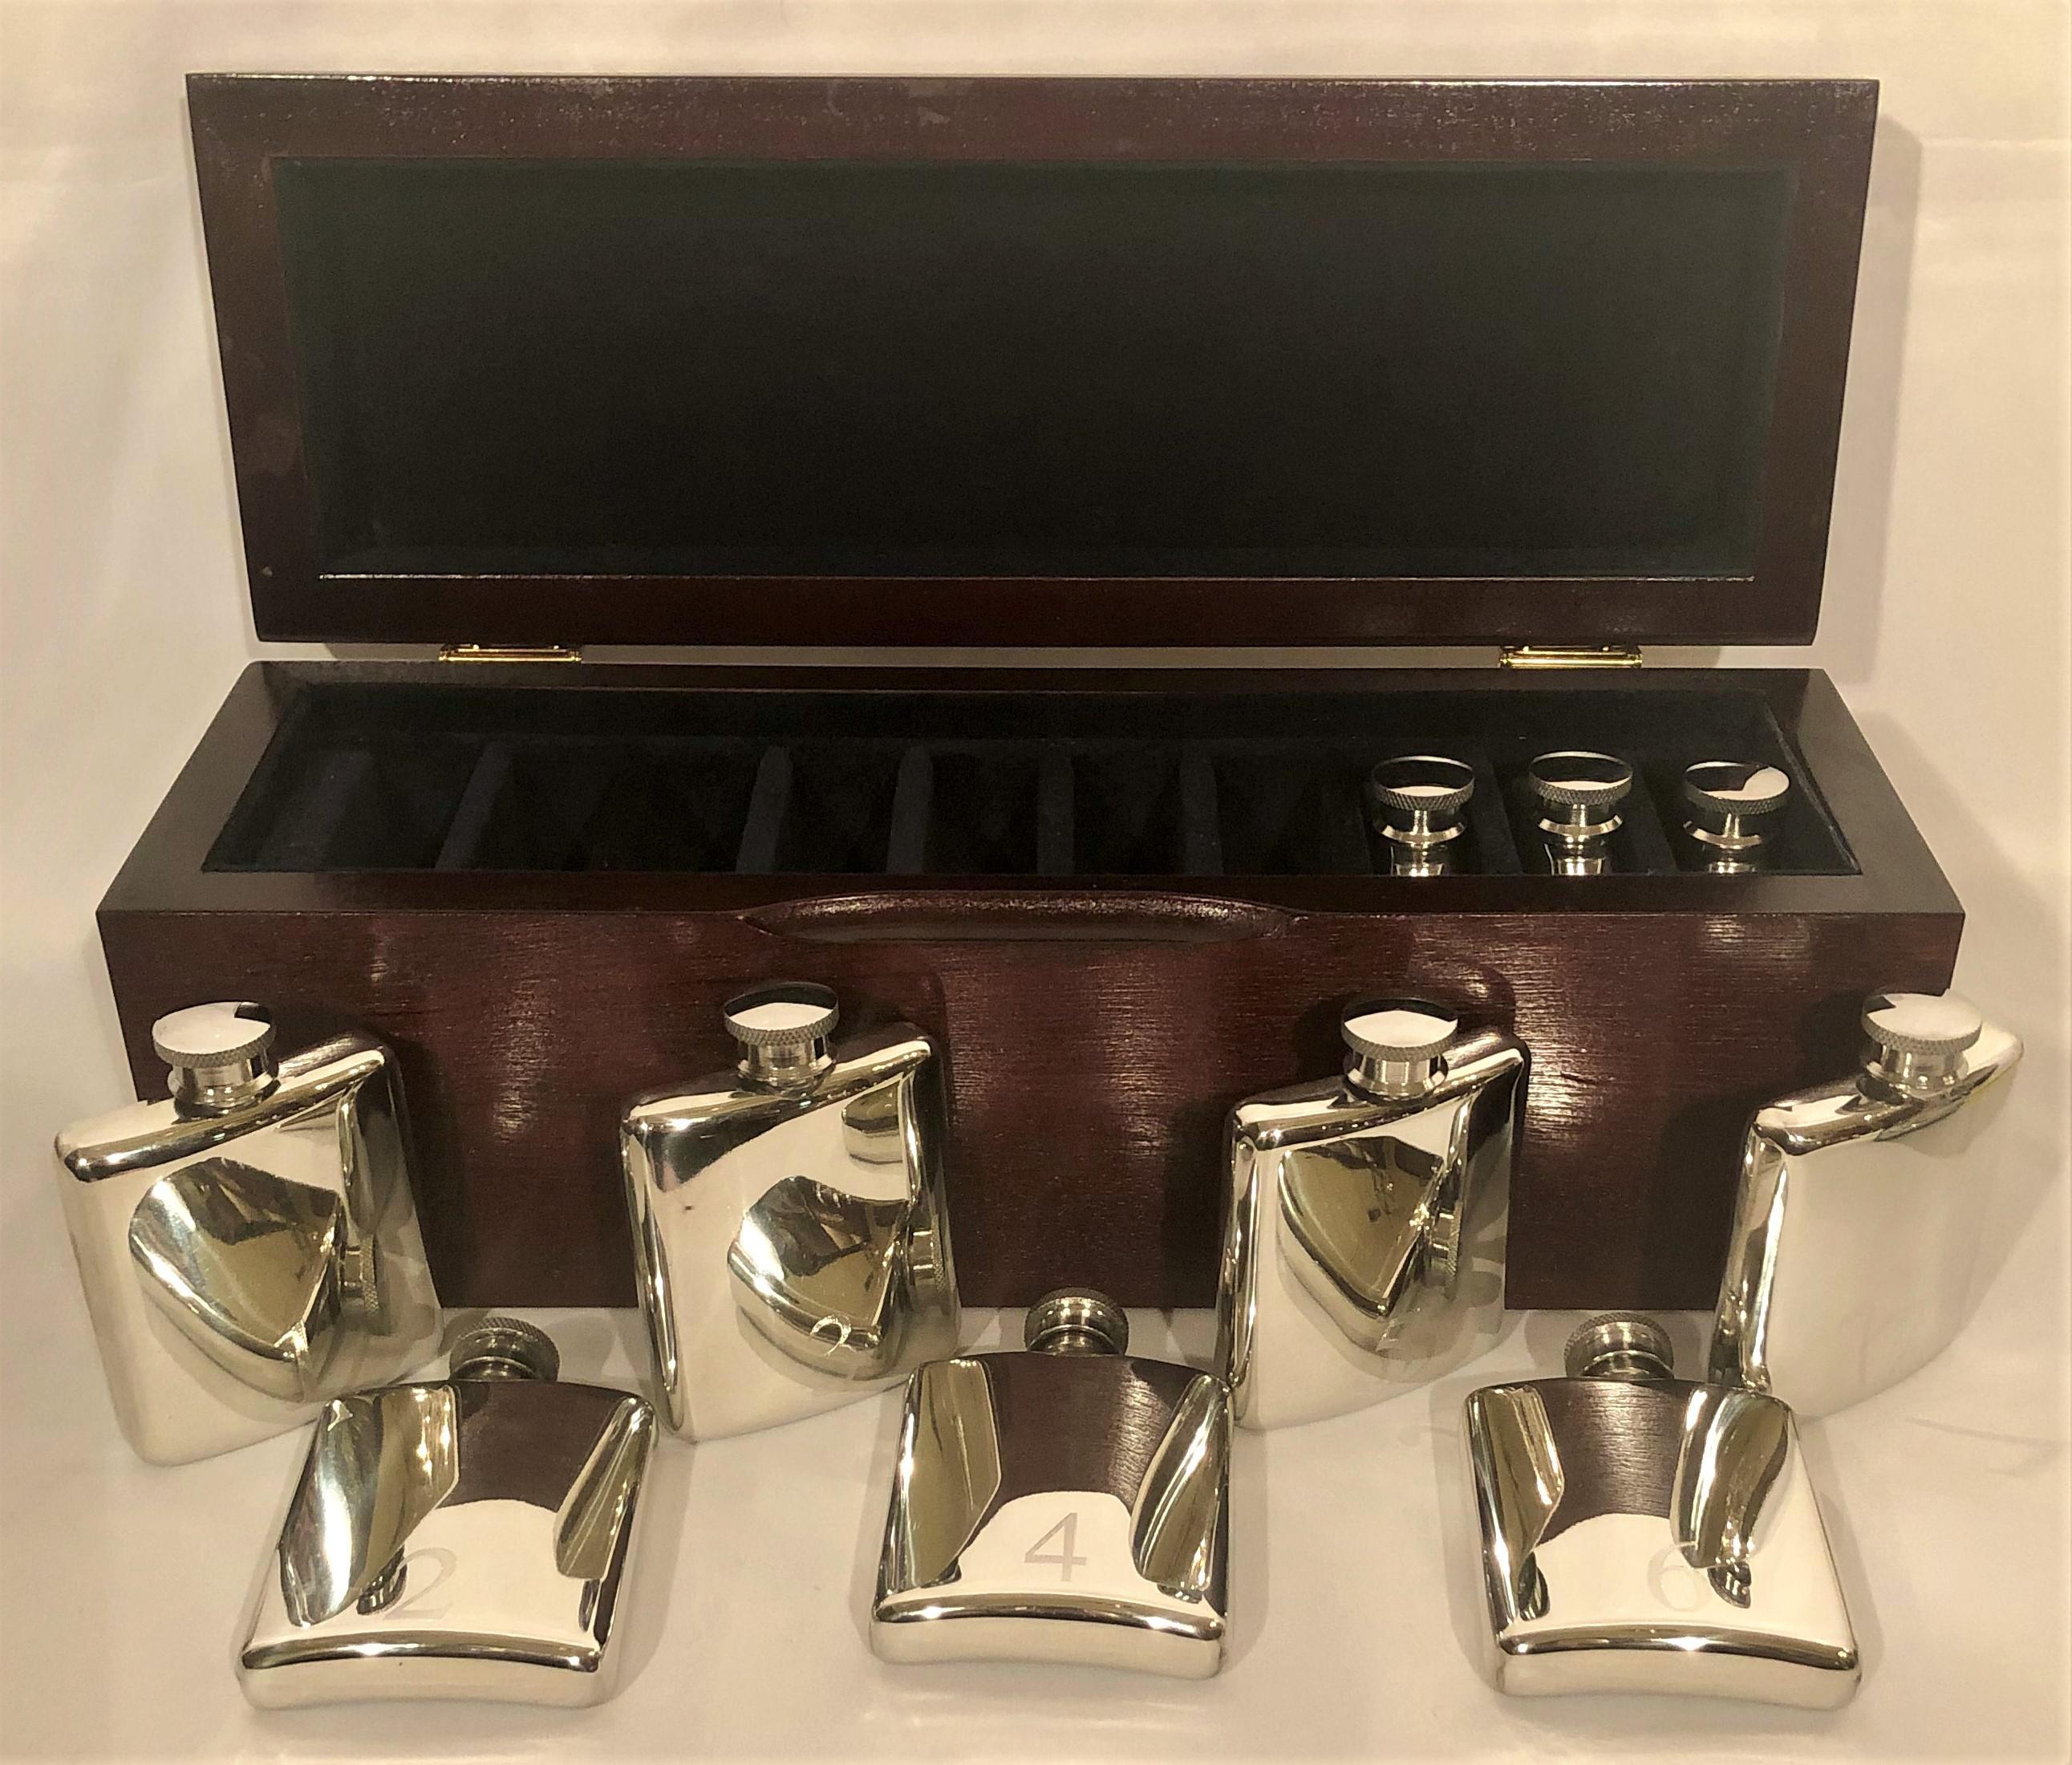 There are 10 silver flasks, number 1-10, in this fitted box. The flasks were numbered so that the members of the hunt would know which flasks was theirs.